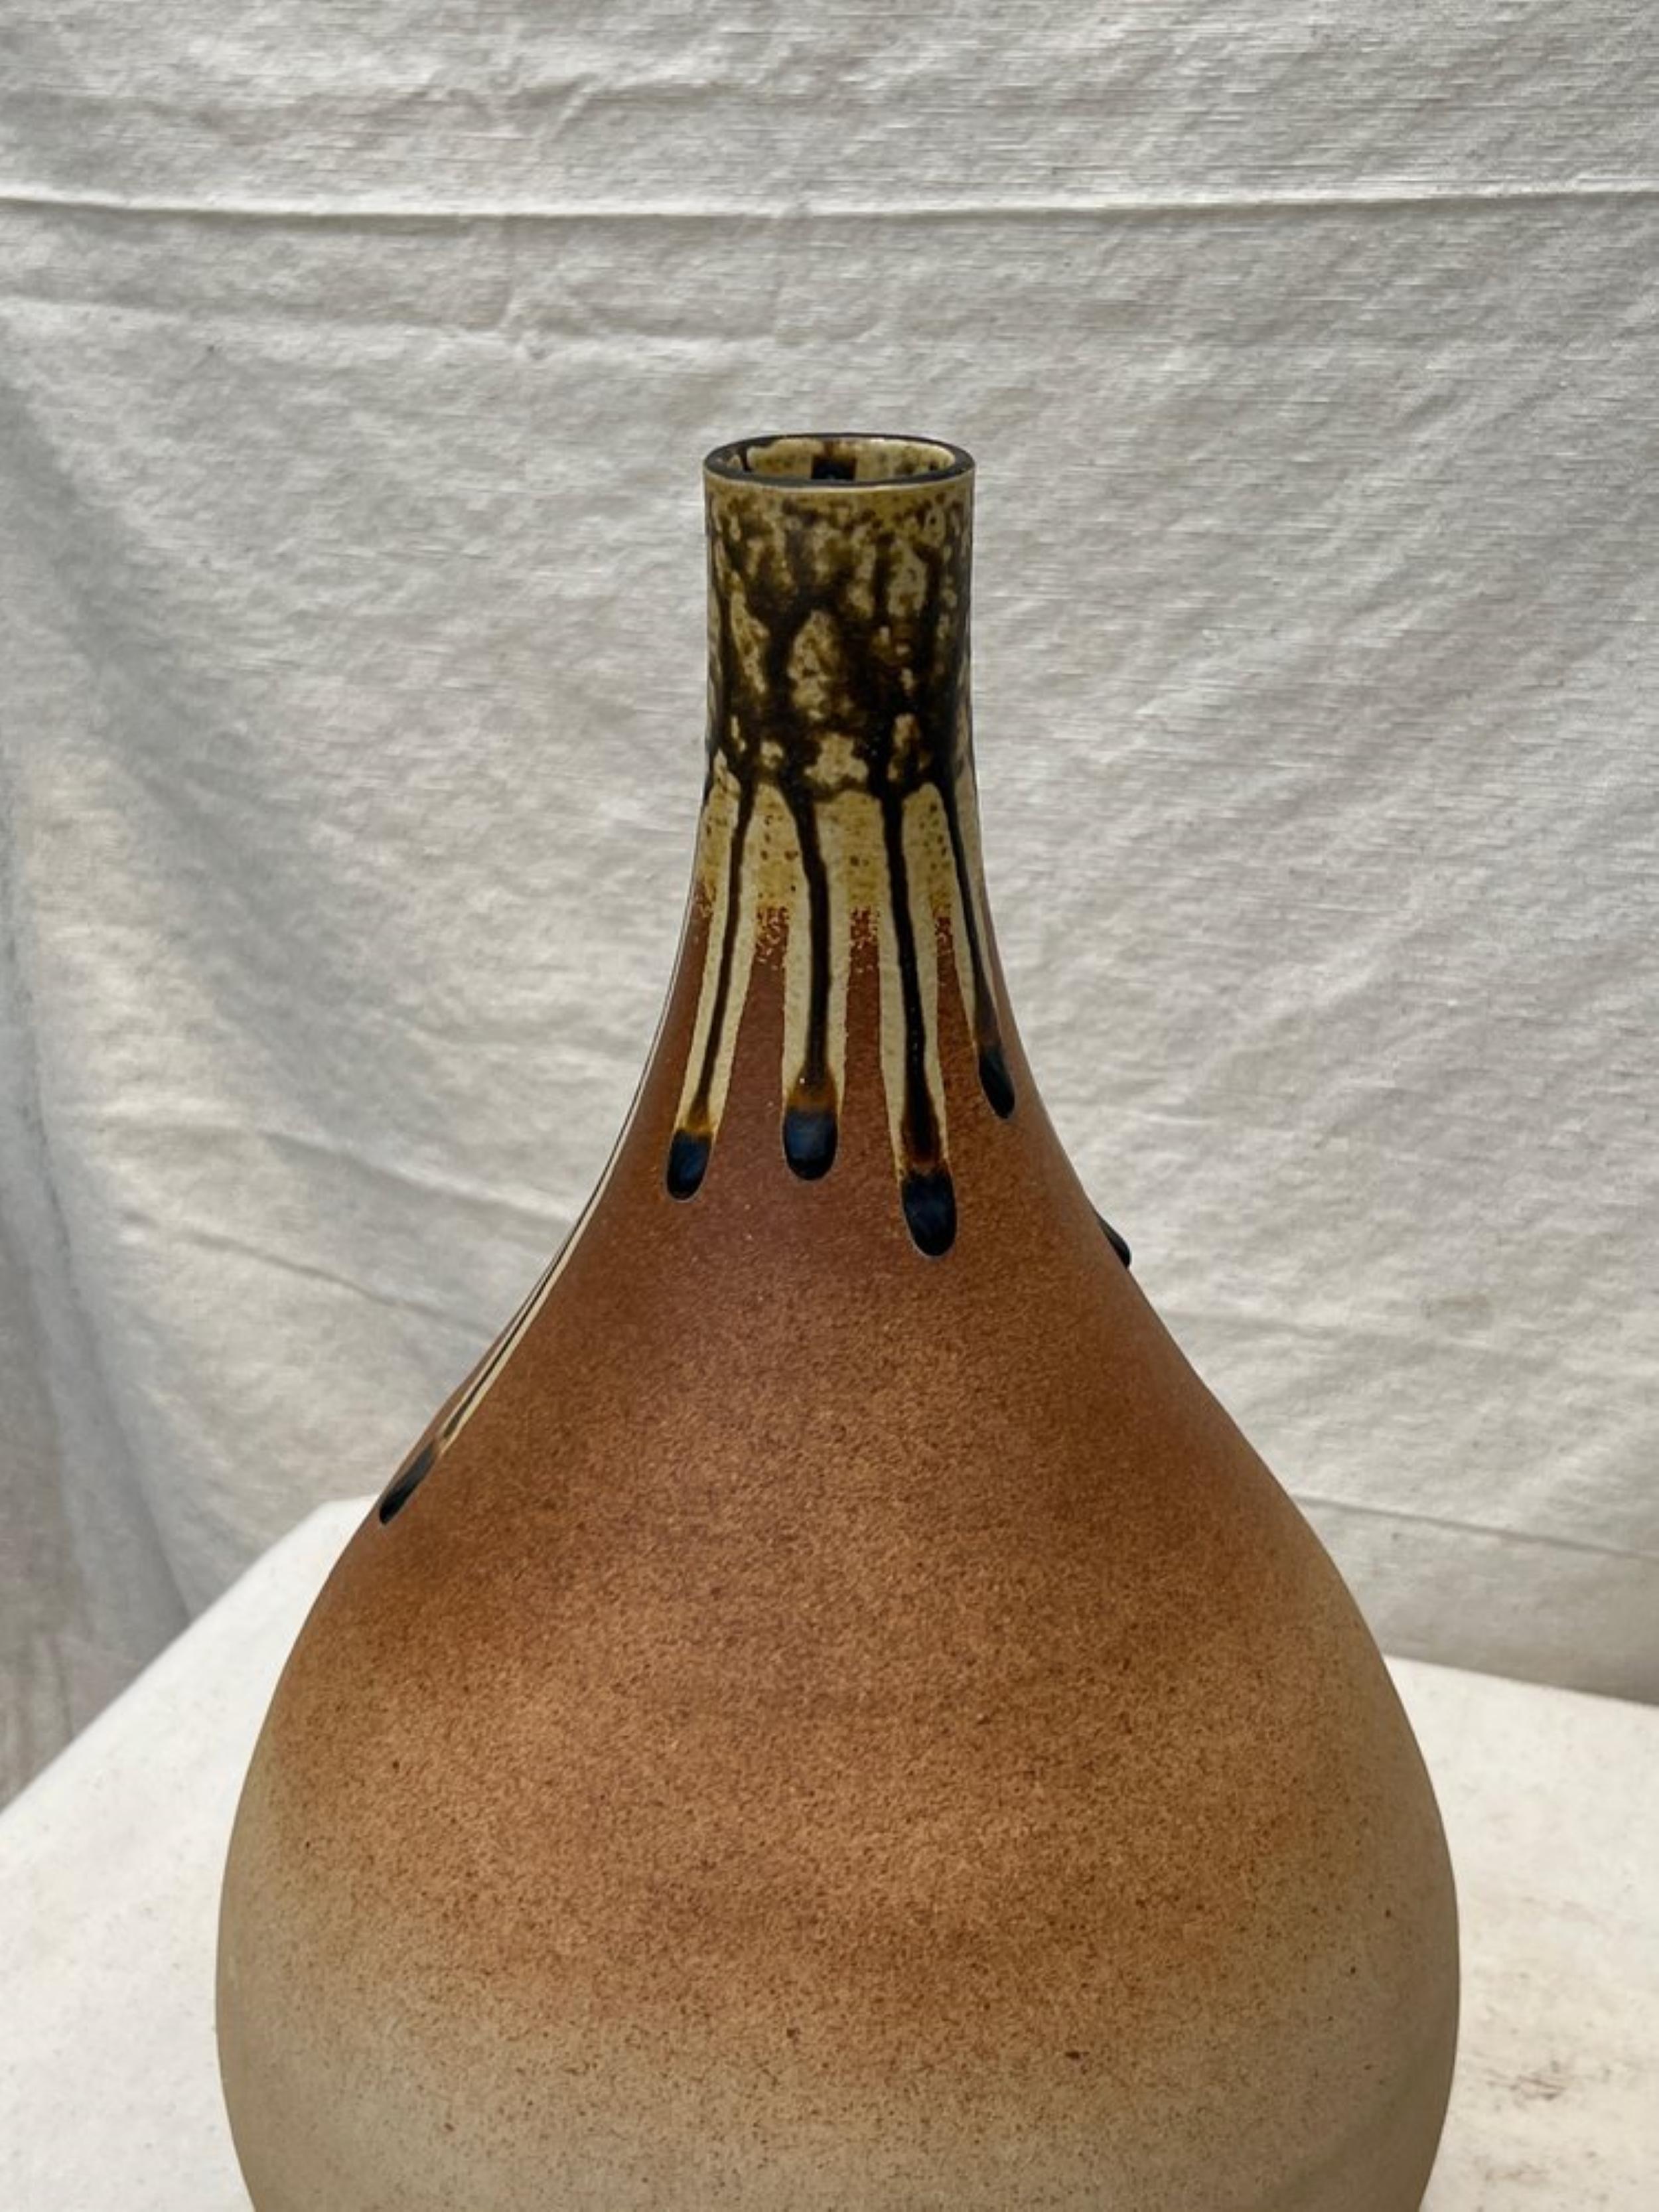 Handcrafted during the mid-20th century, our brown teardrop pottery vase features a distinctive dripping glaze top. This elegant piece embodies the era's style and sophistication.

Measurements: 9.5